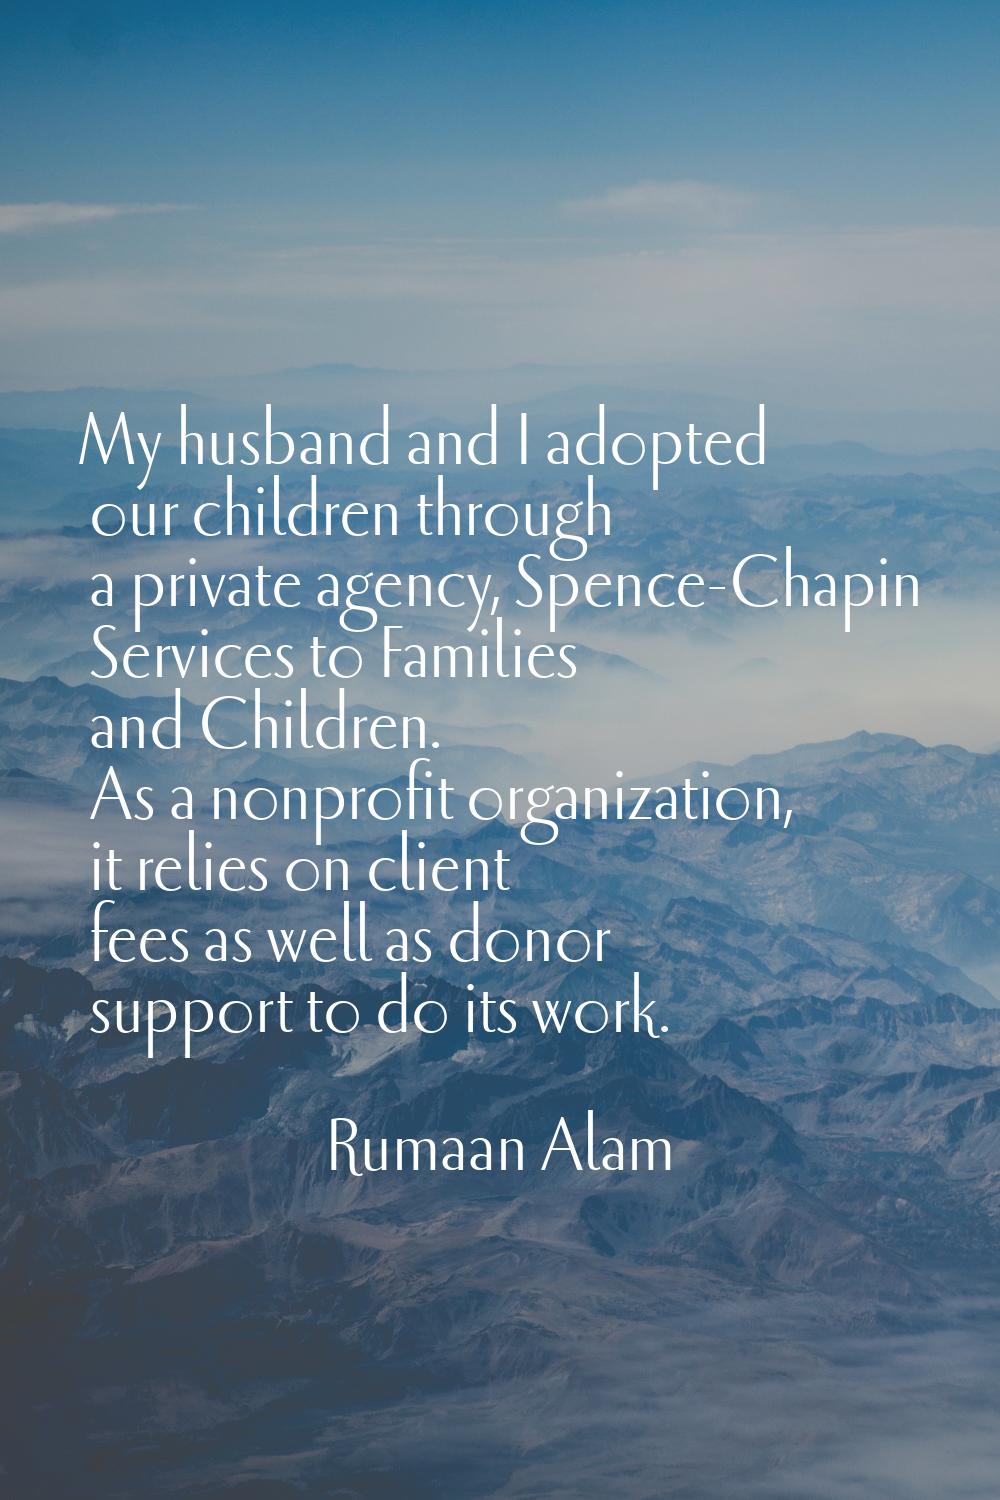 My husband and I adopted our children through a private agency, Spence-Chapin Services to Families 